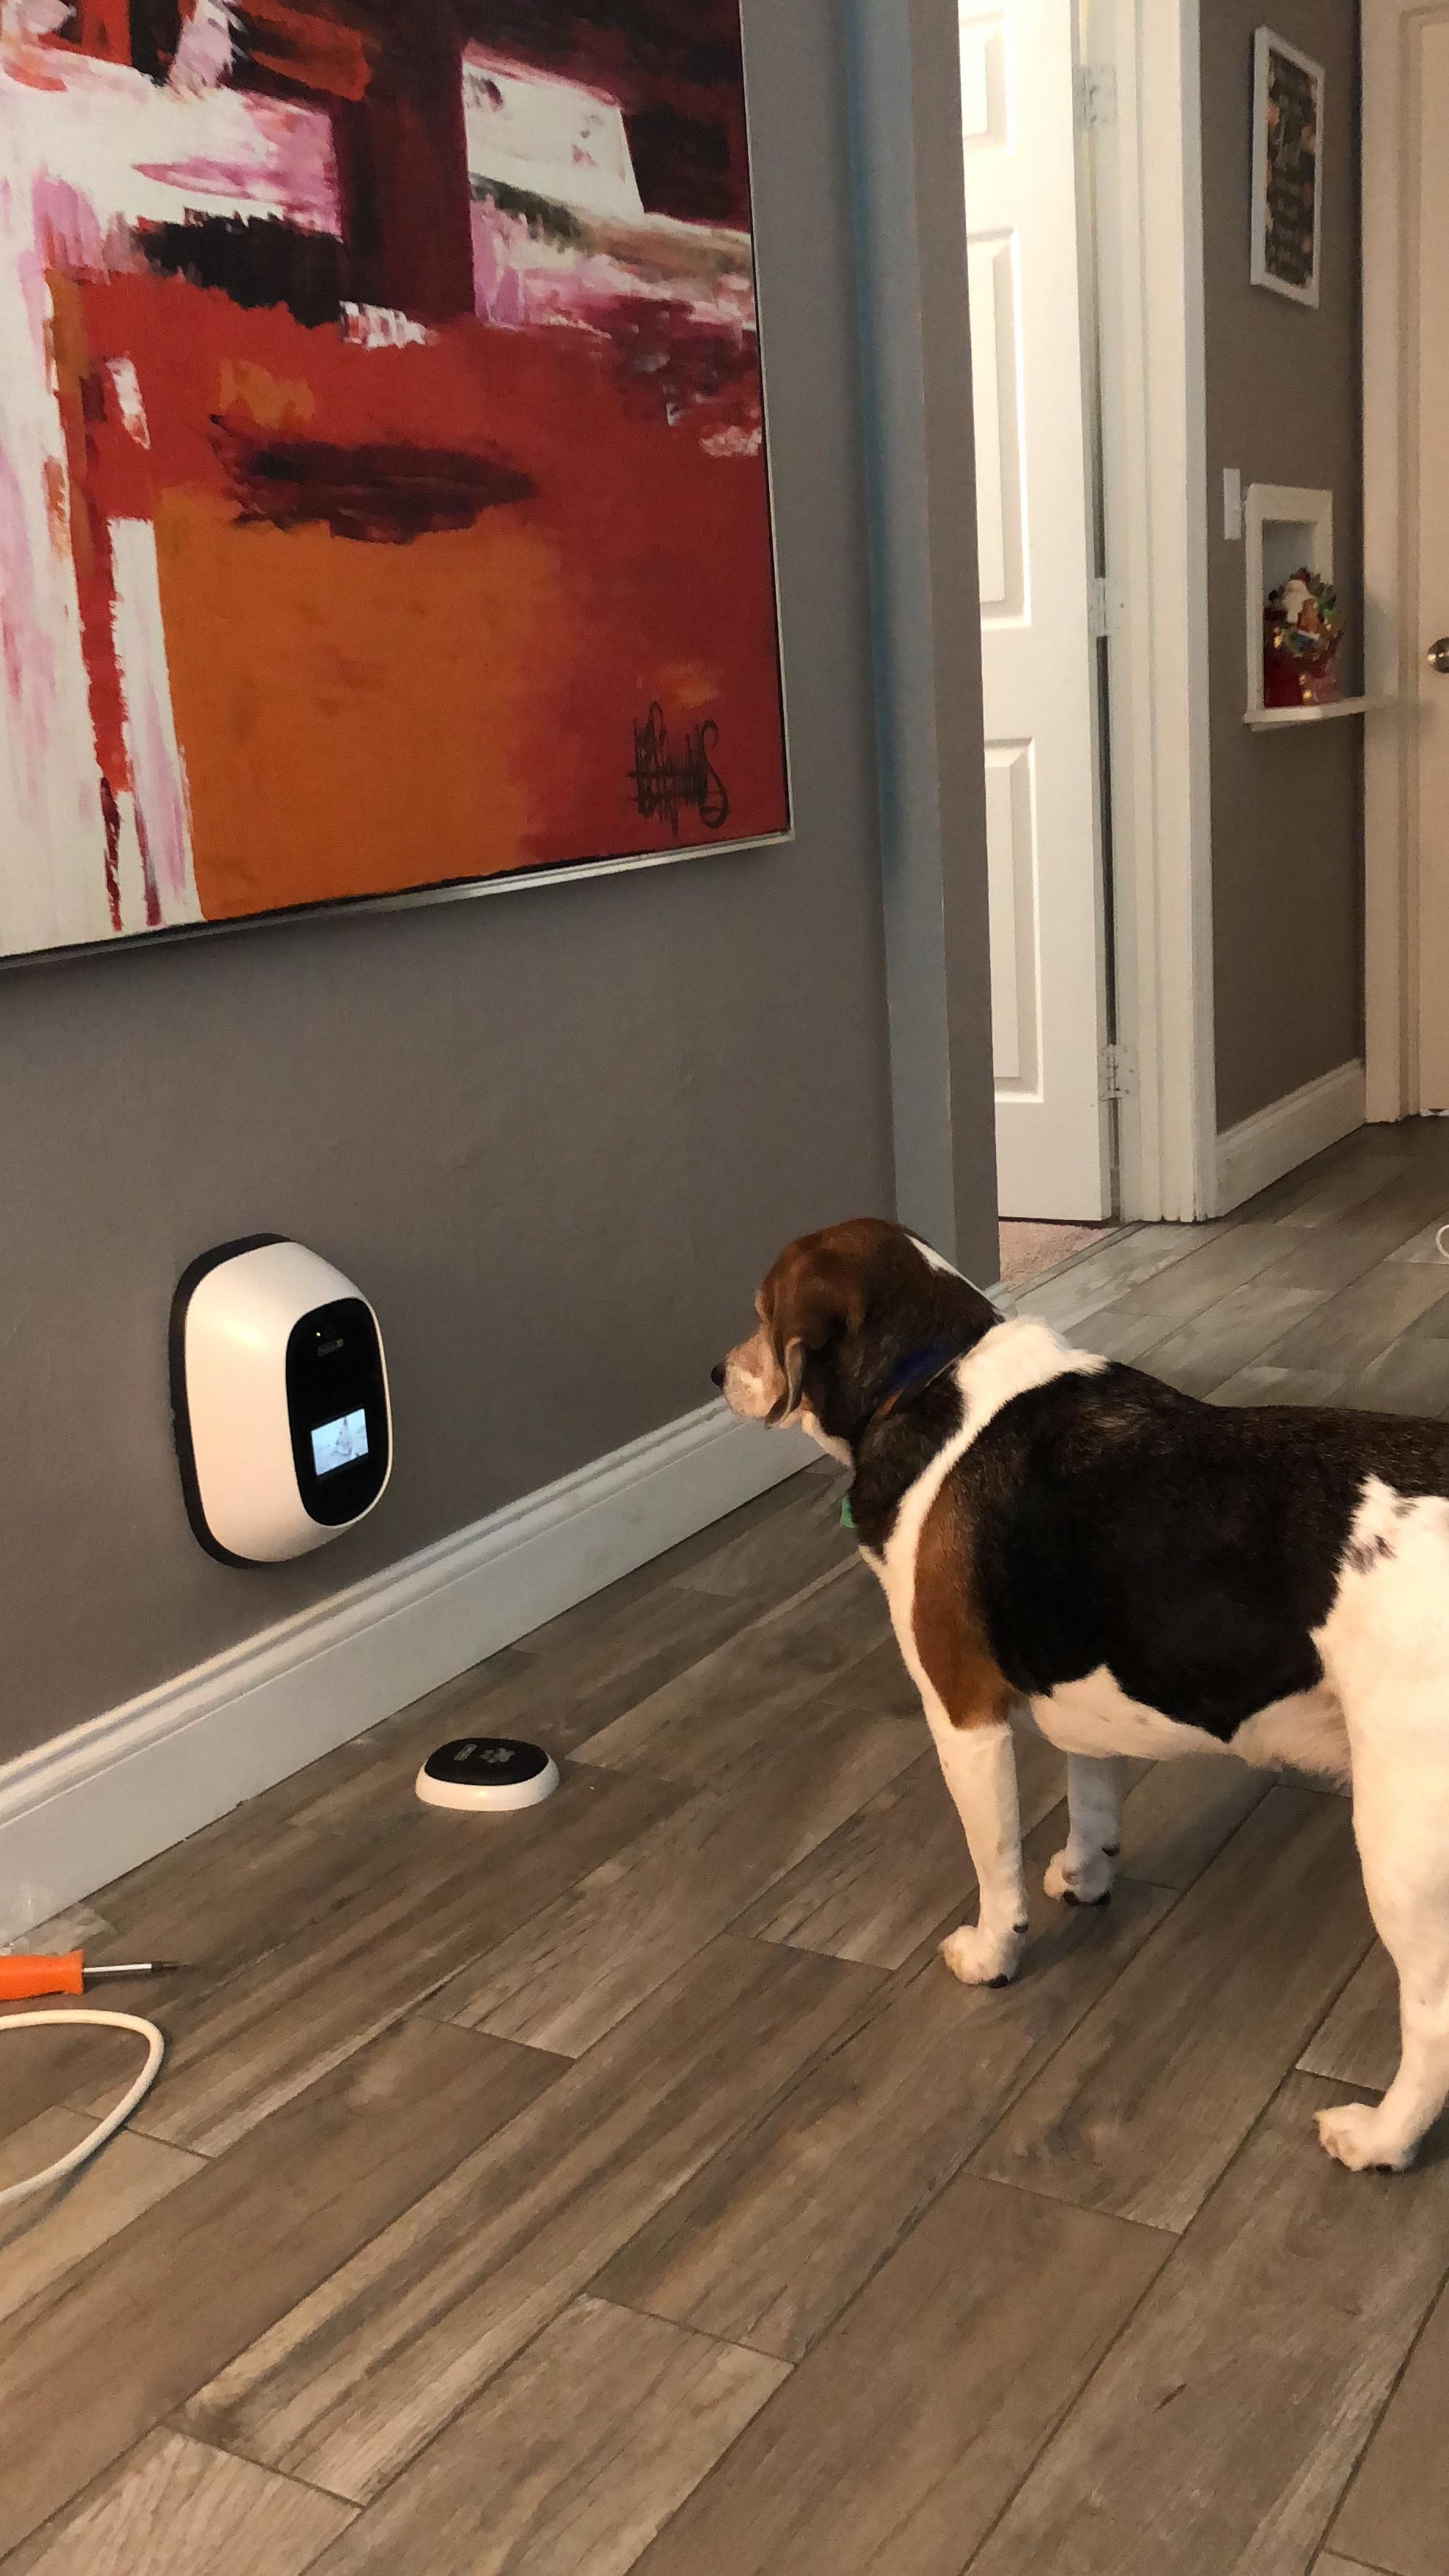 We got a pet cam for Christmas that also has “dog tv”. It plays music and pictures of other dogs. She’s been watching for a while now. She’s turned into a hooman.